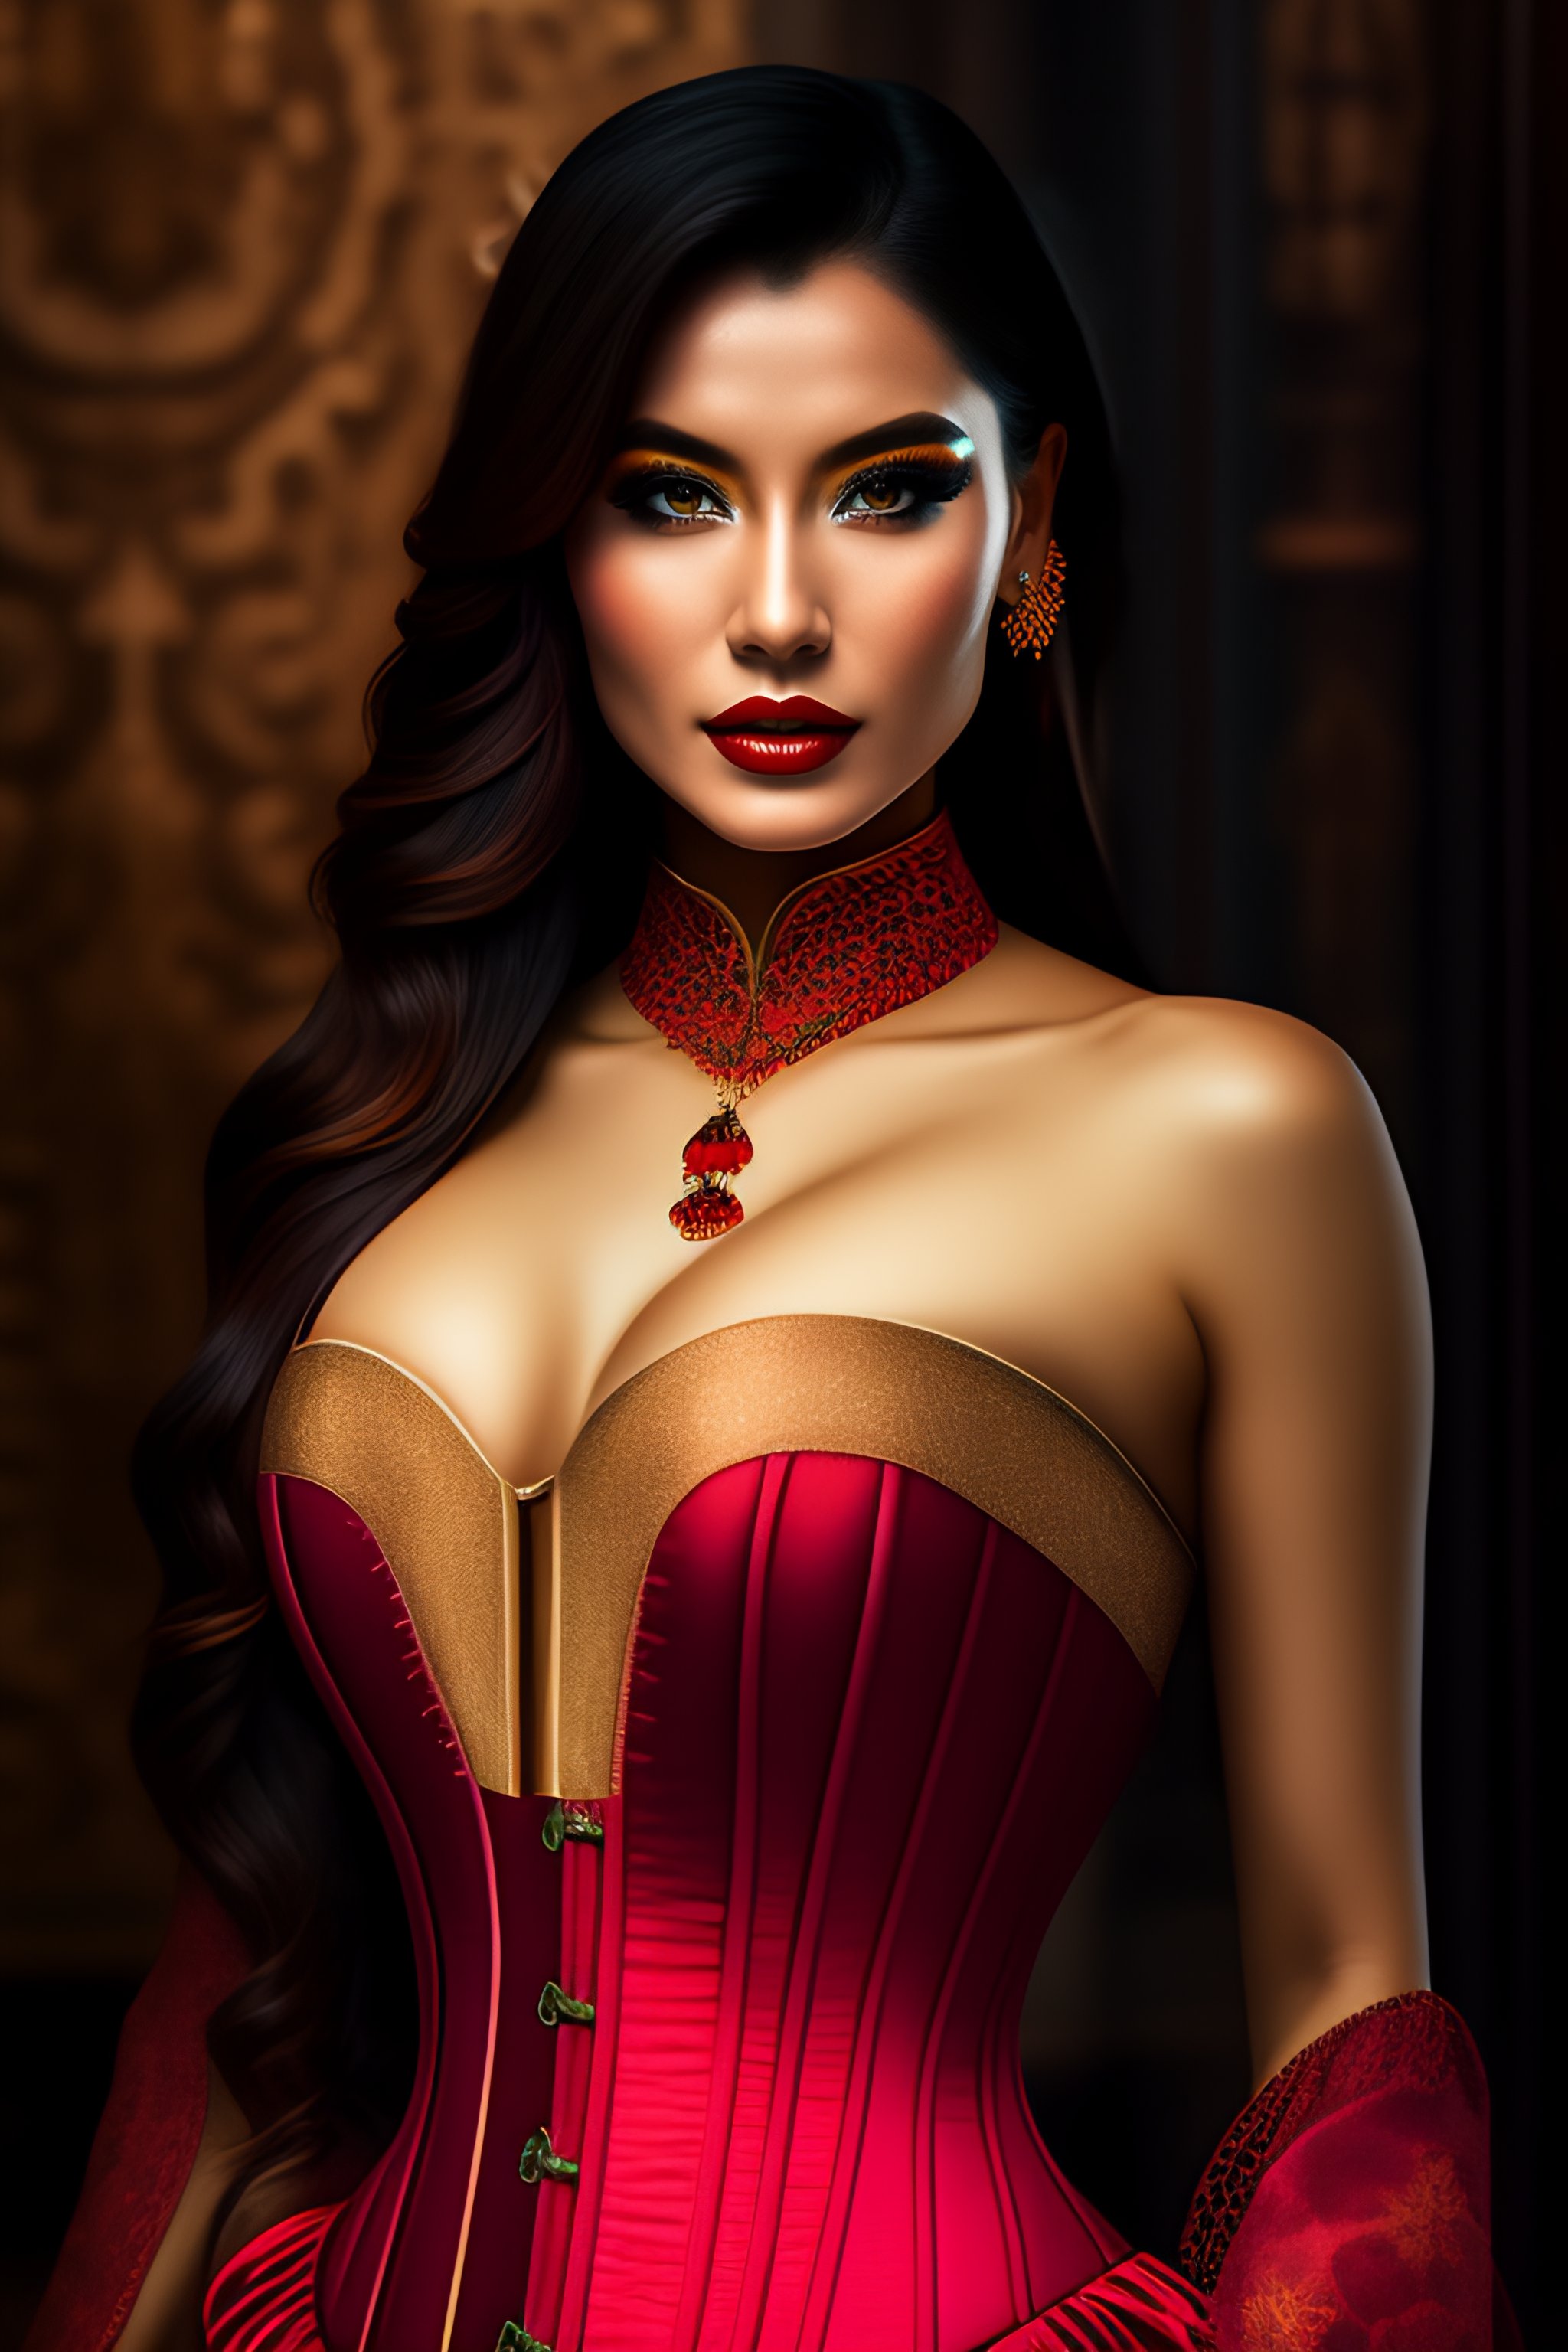 Lexica Symmetry Portrait Of An Attractive Caucassian Model Woman In Revealing Corset Glam